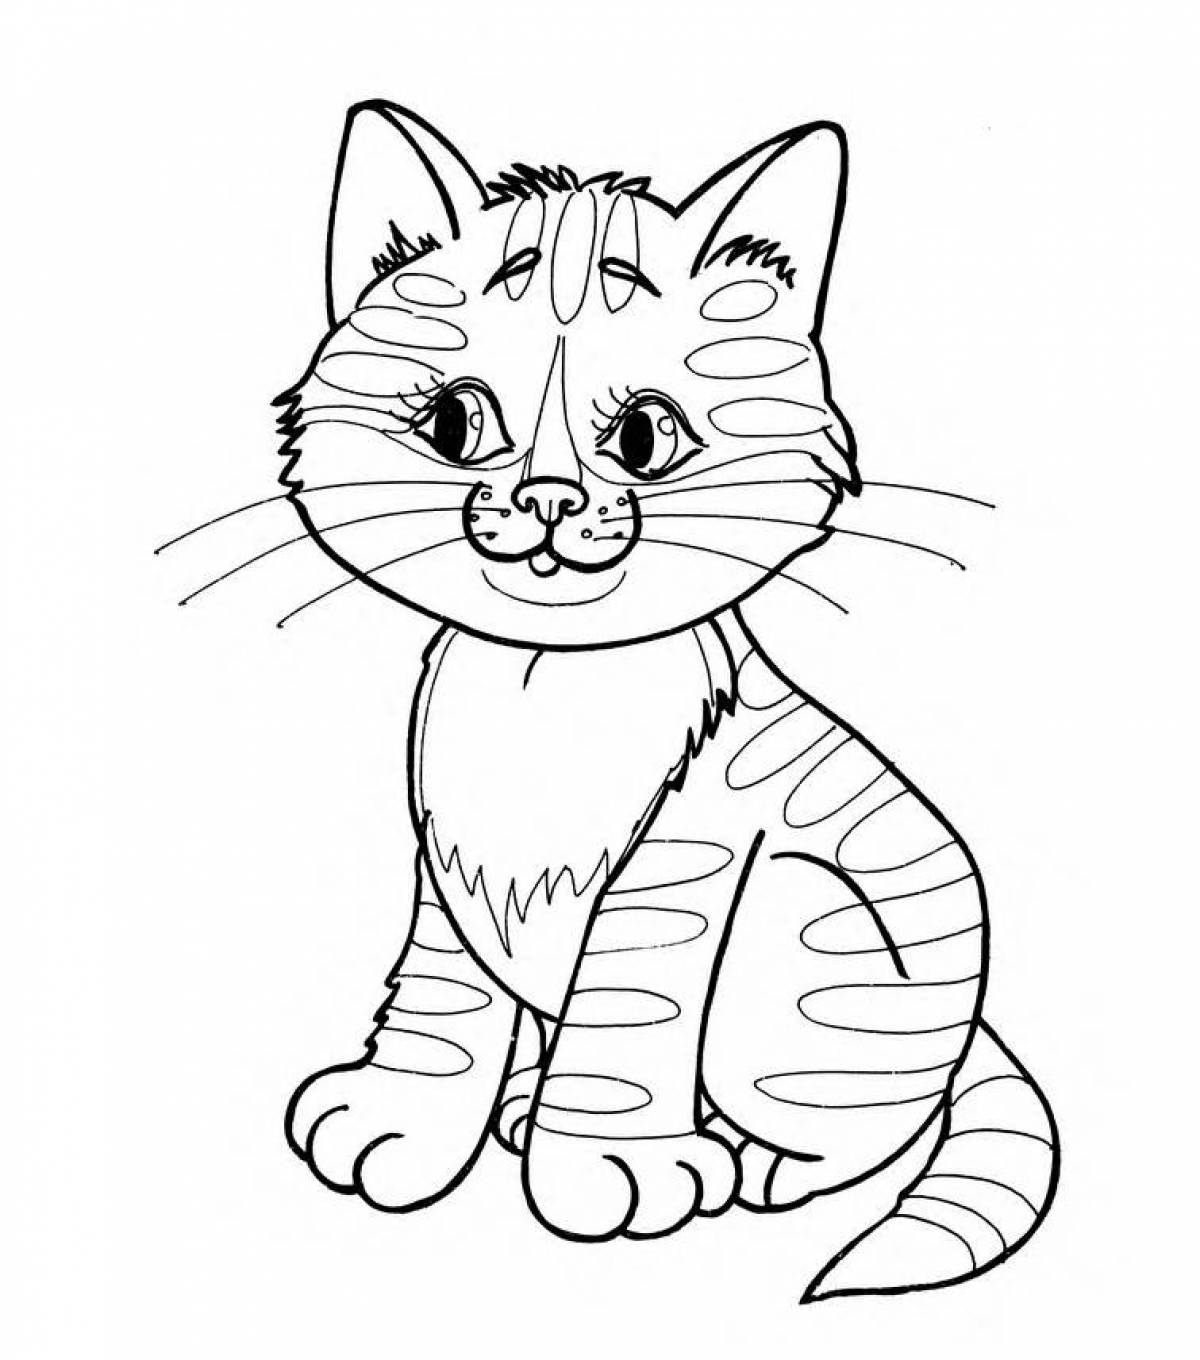 Fun coloring pages animals for kids 5-6 years old